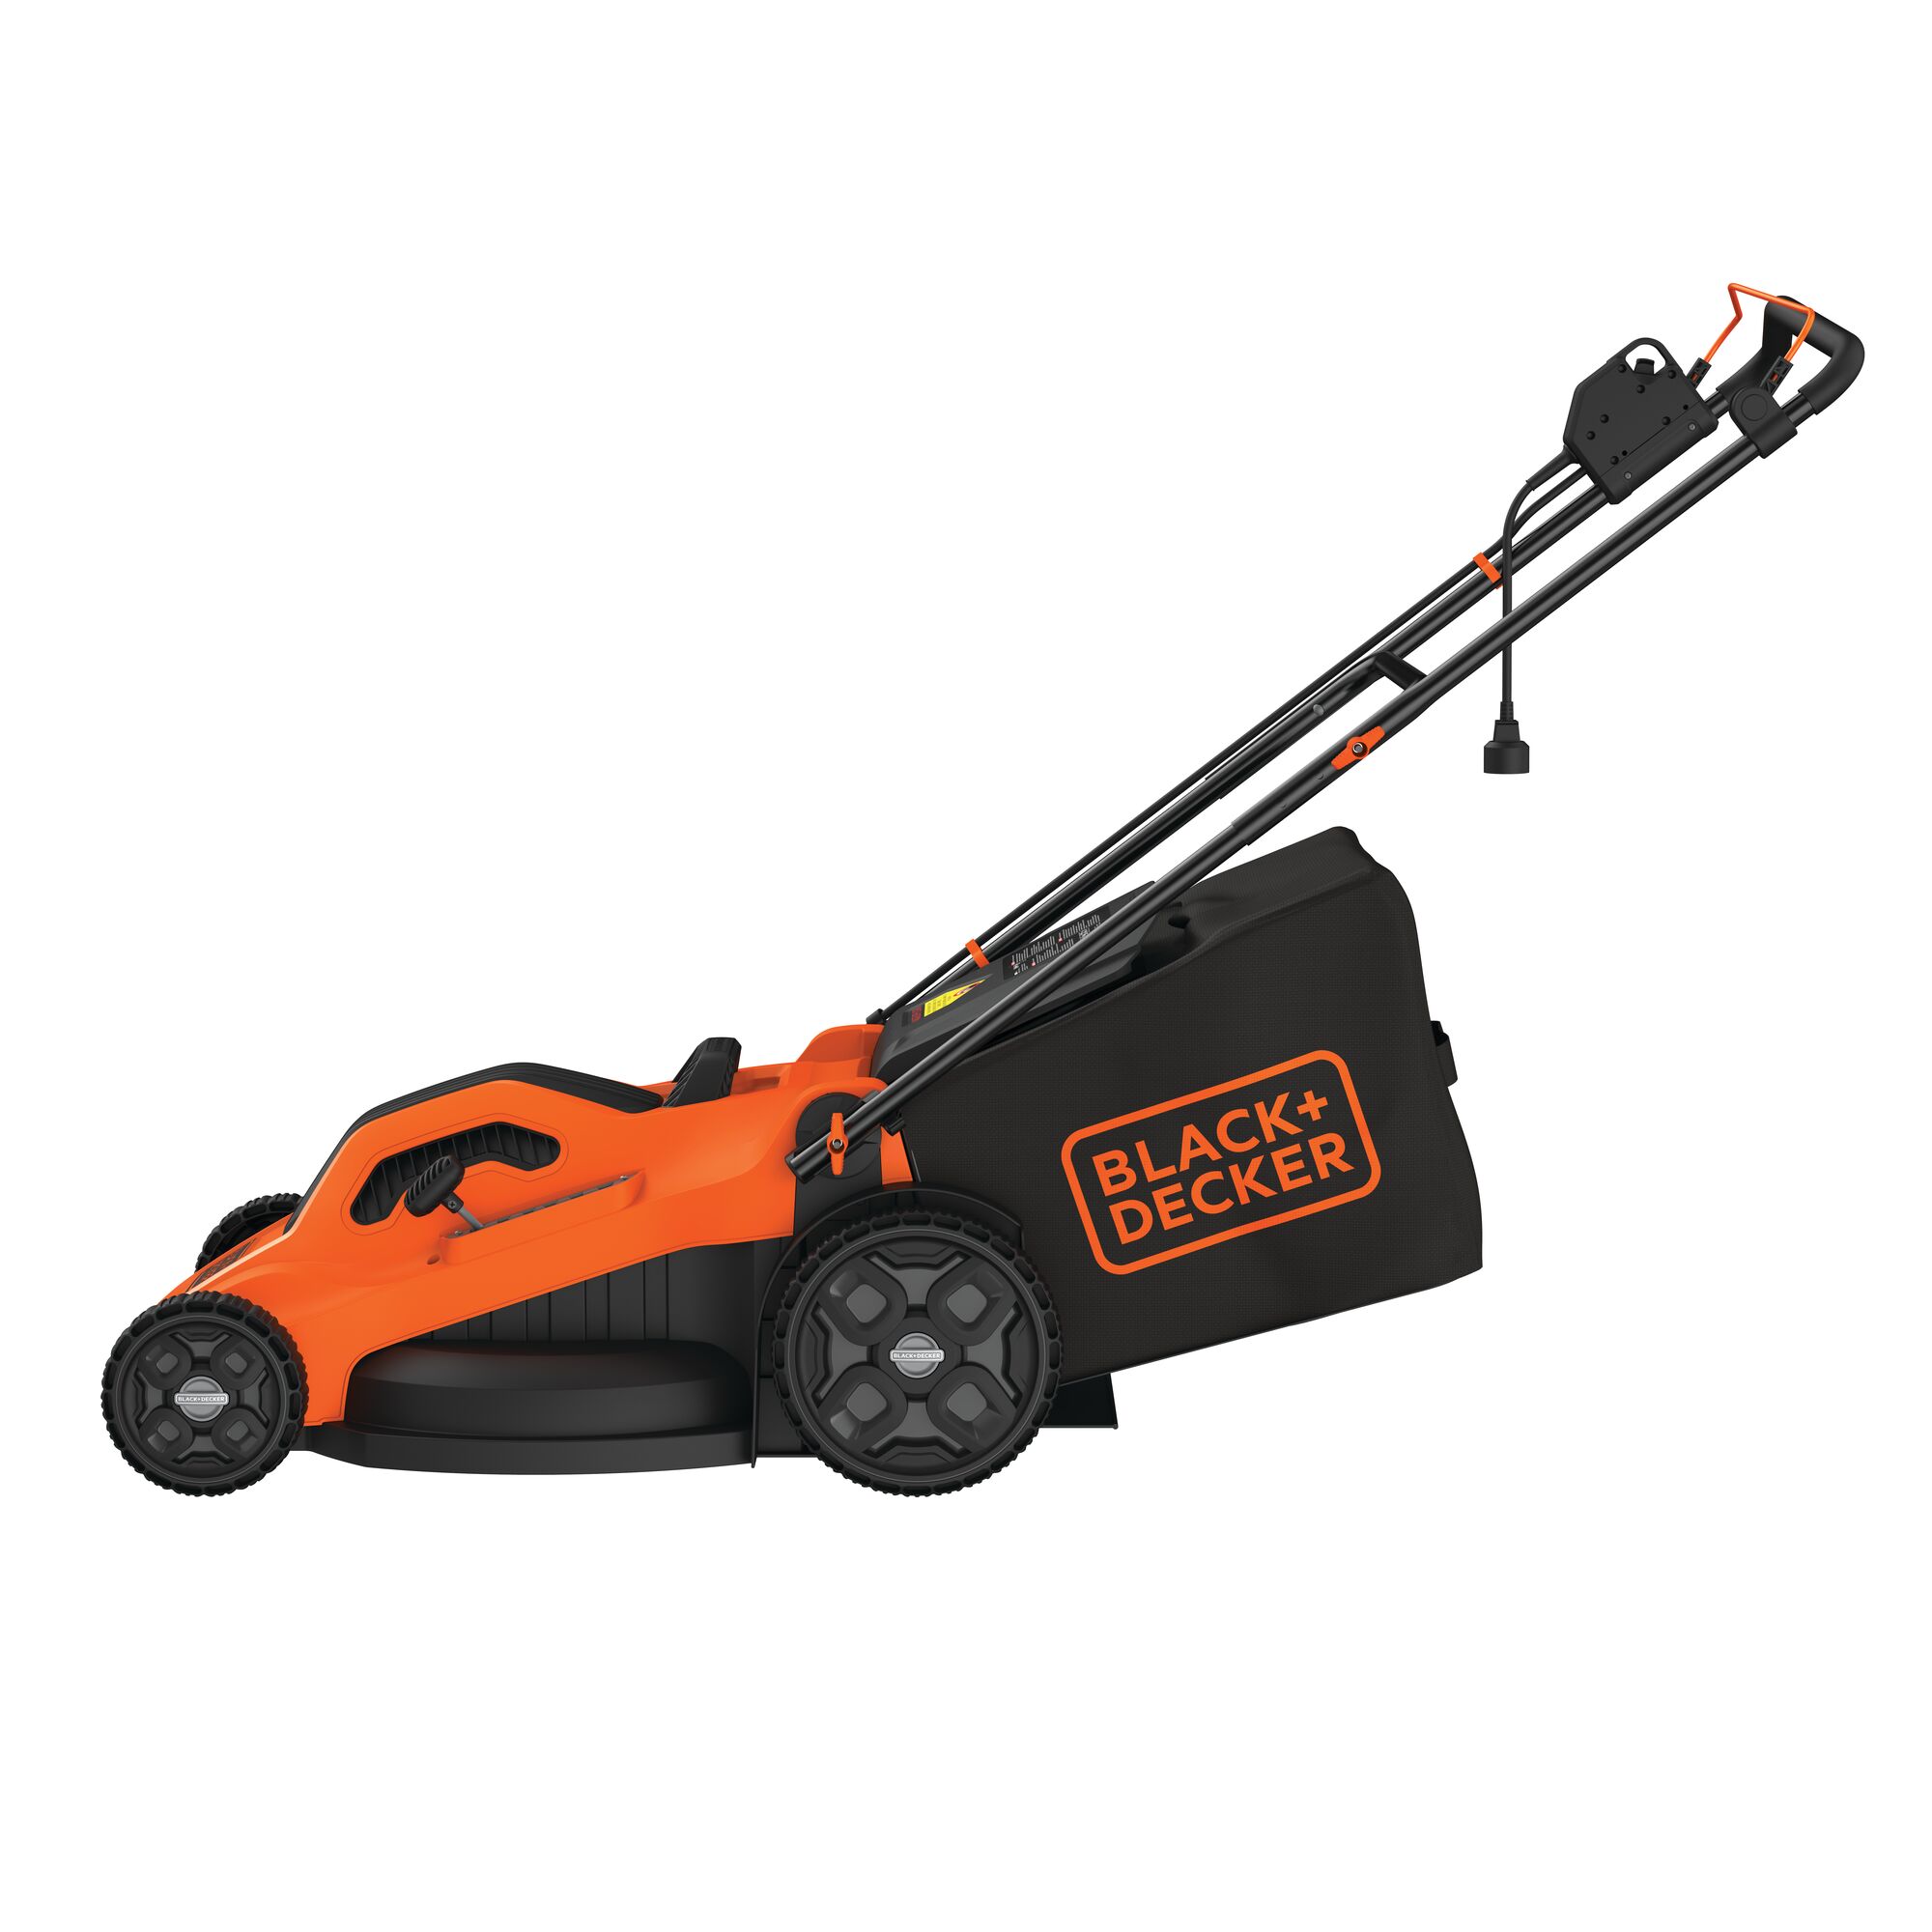 Profile of 13 amp 20 degree corded electric lawn mower.